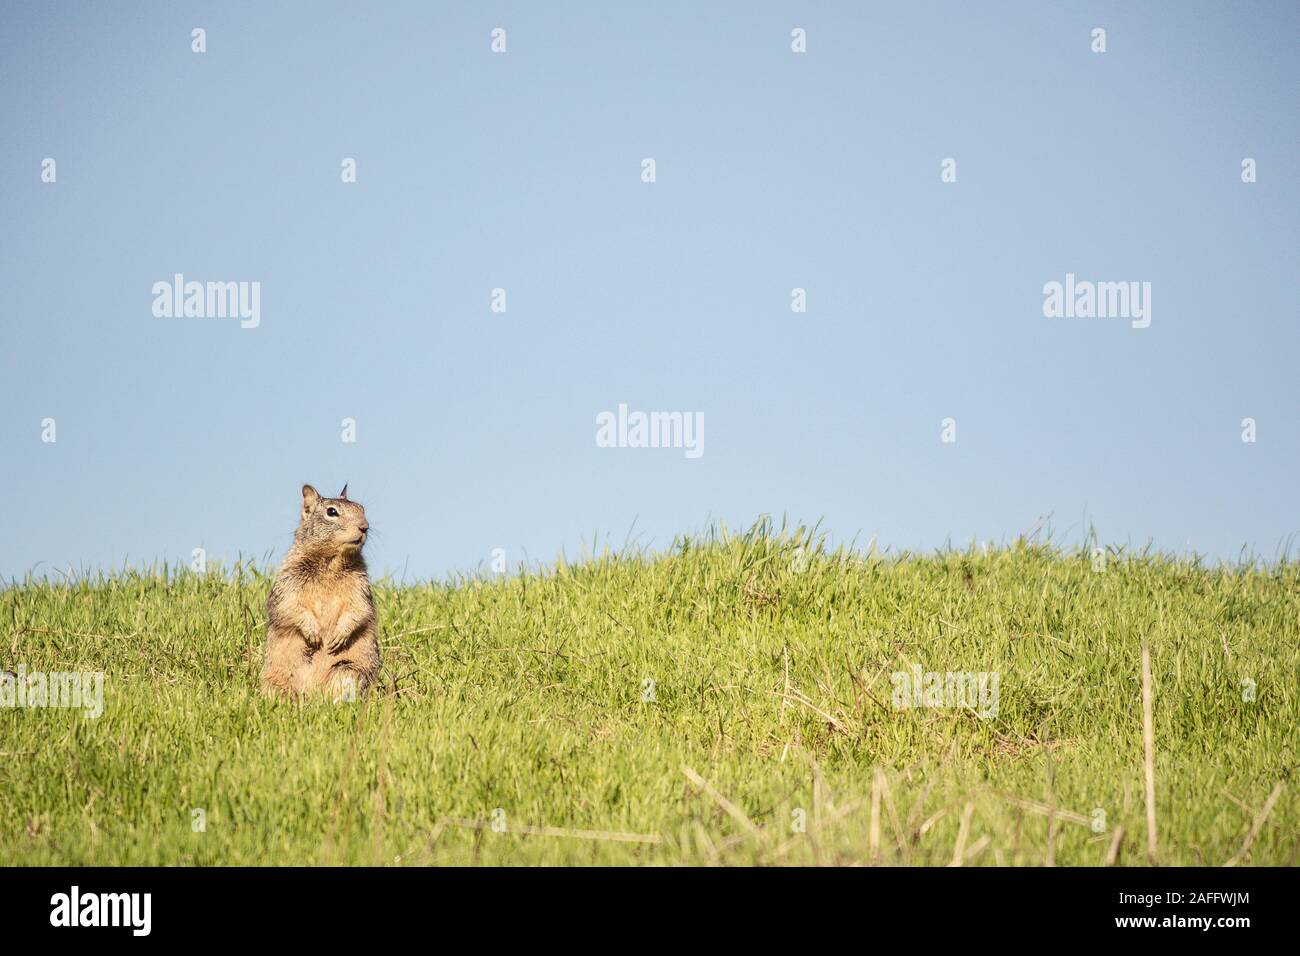 California Ground Squirrel sitting on hind legs with front paws raised looking to the side. Blue sky & green grass. Stock Photo